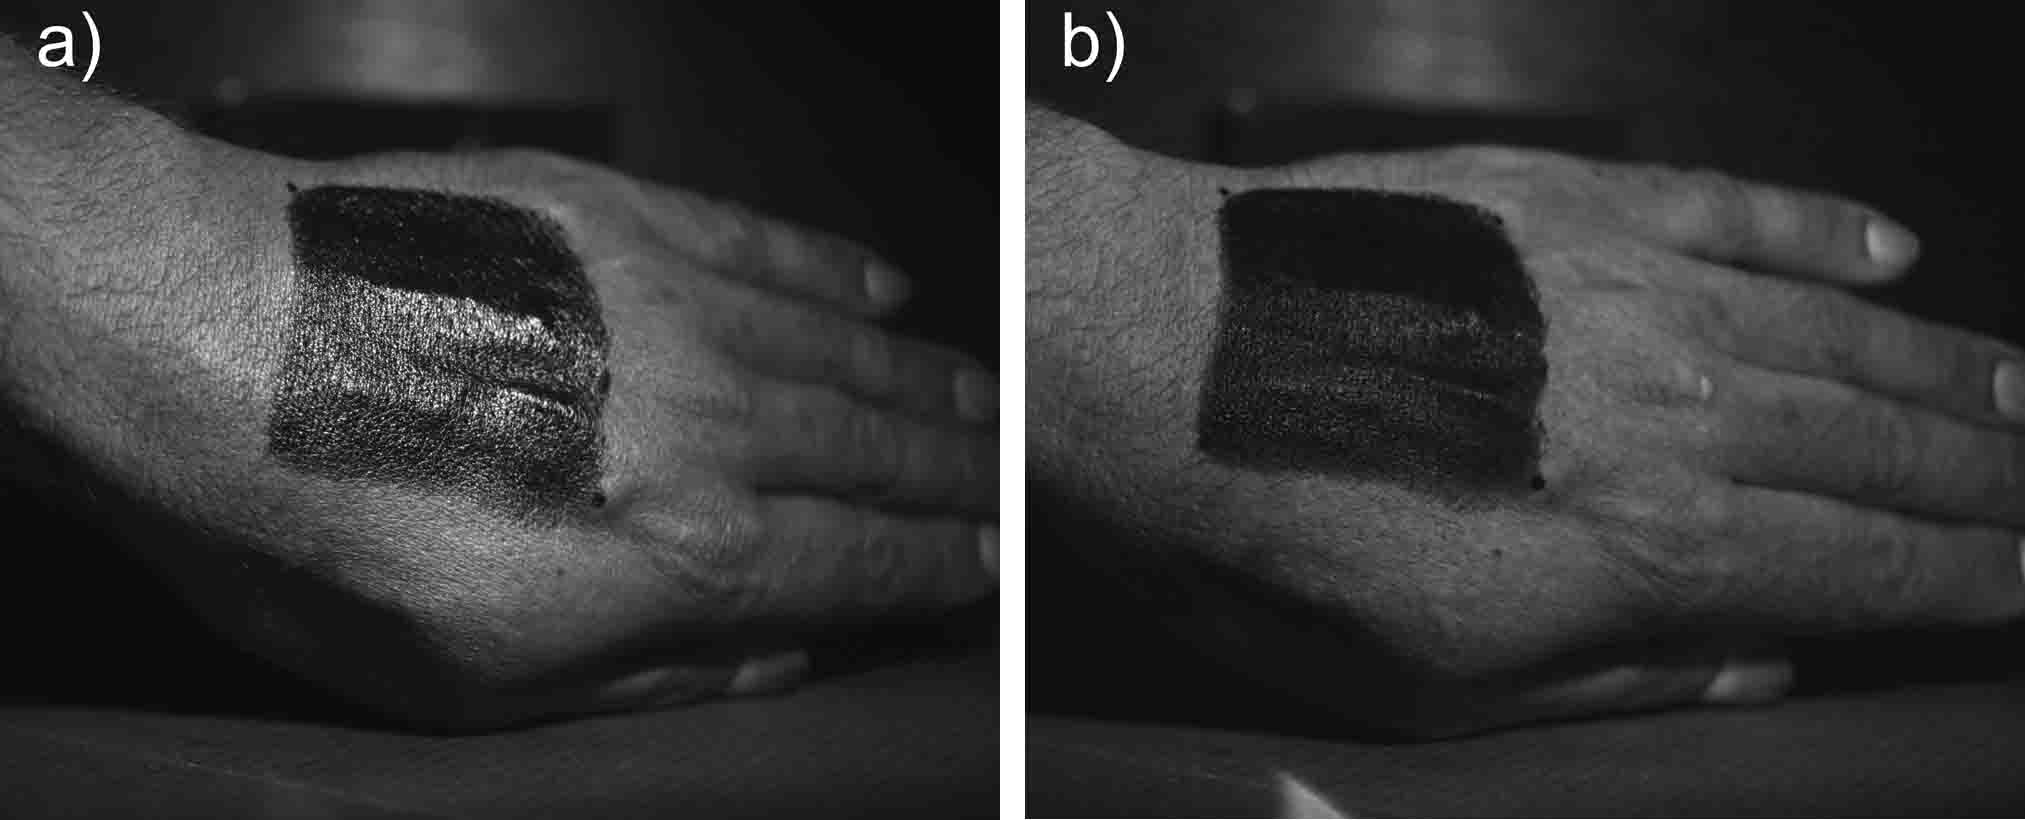 Comparison of a) non-polarised and b) cross polarised images of an SPF sunscreen film applied to skin